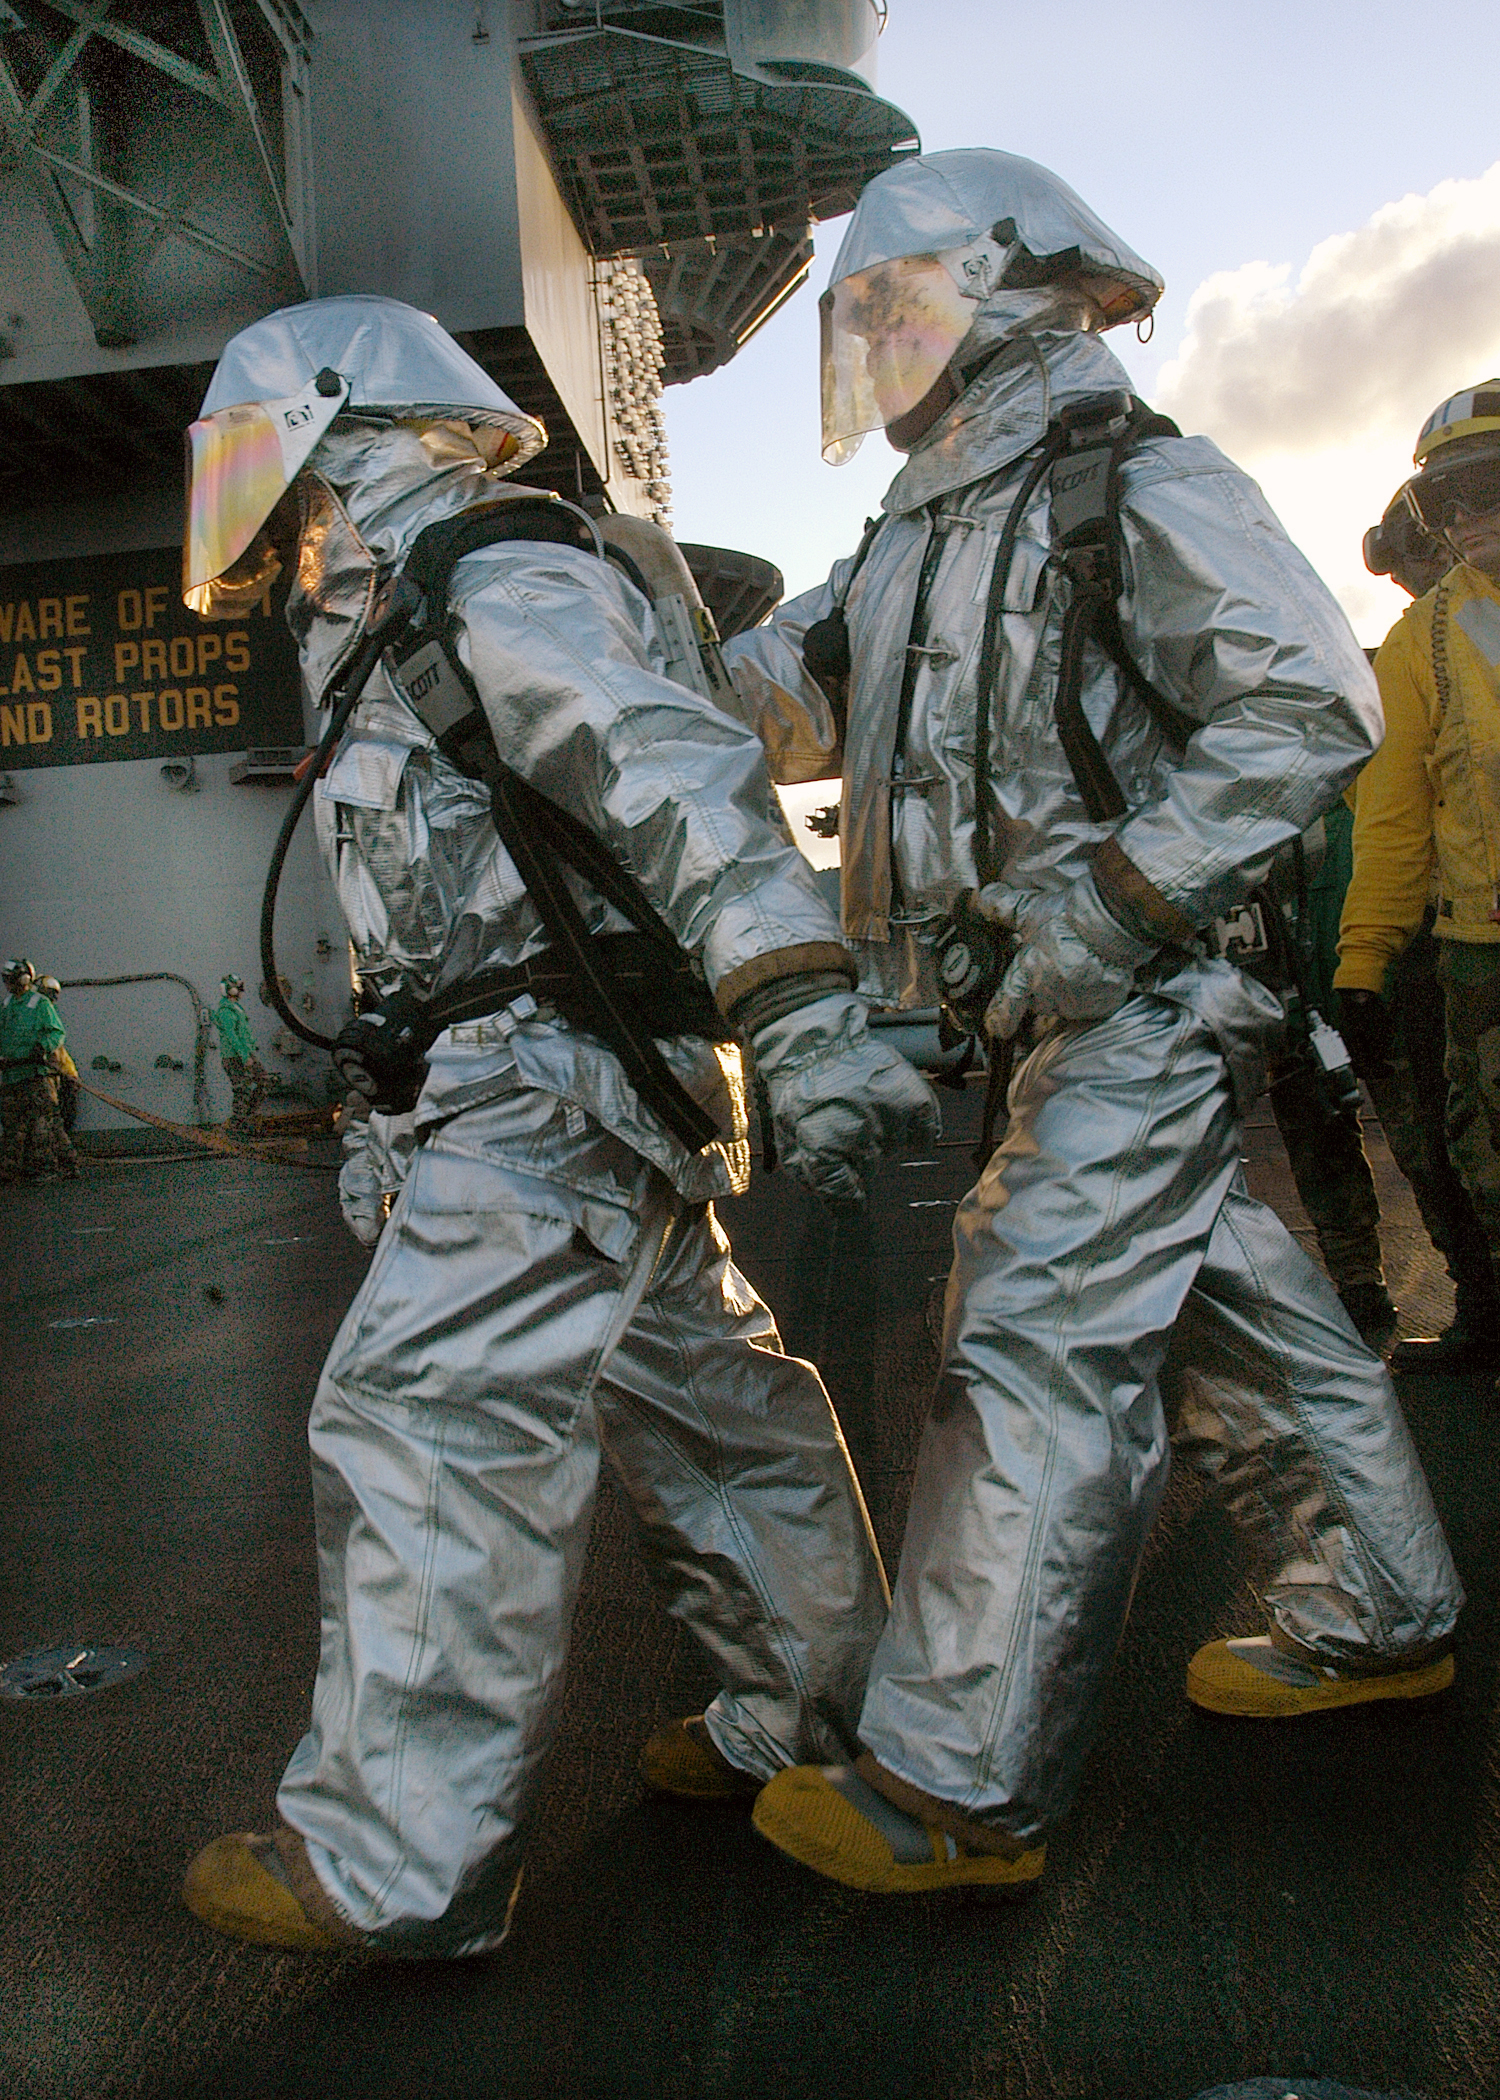 US Navy 040430-N-0119G-003 Sailors assigned to Air Department's Crash and Salvage team prepare to enter the scene of a simulated fire